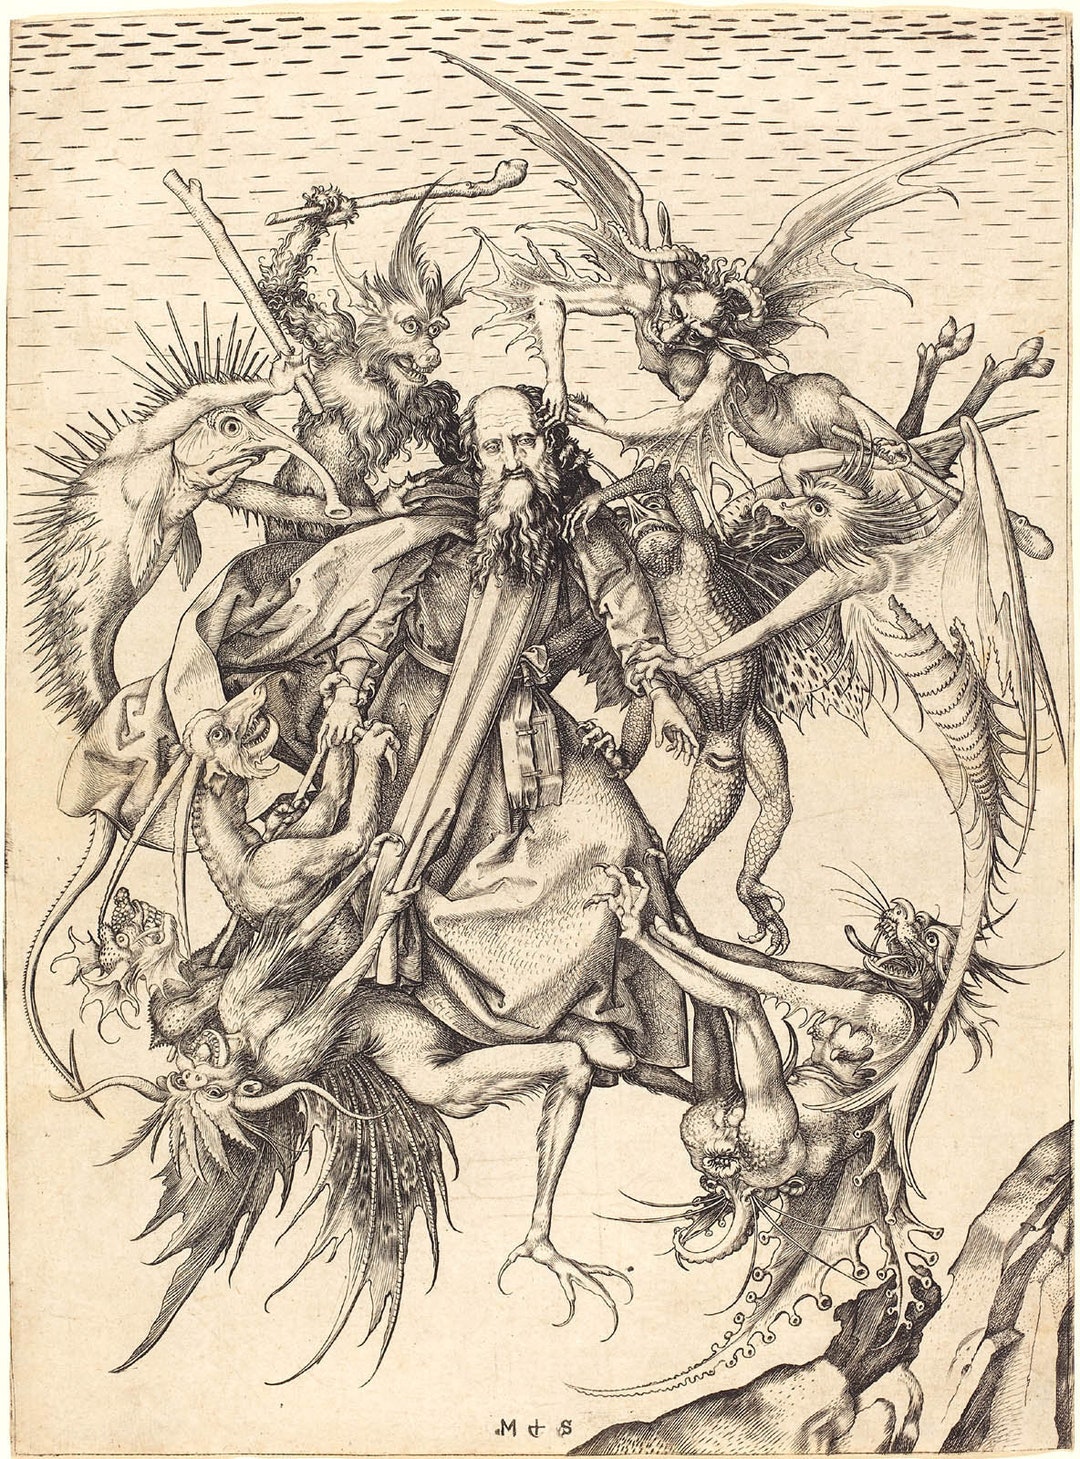 European Master Print Reproductions: Martin Schongauer St. - Etsy